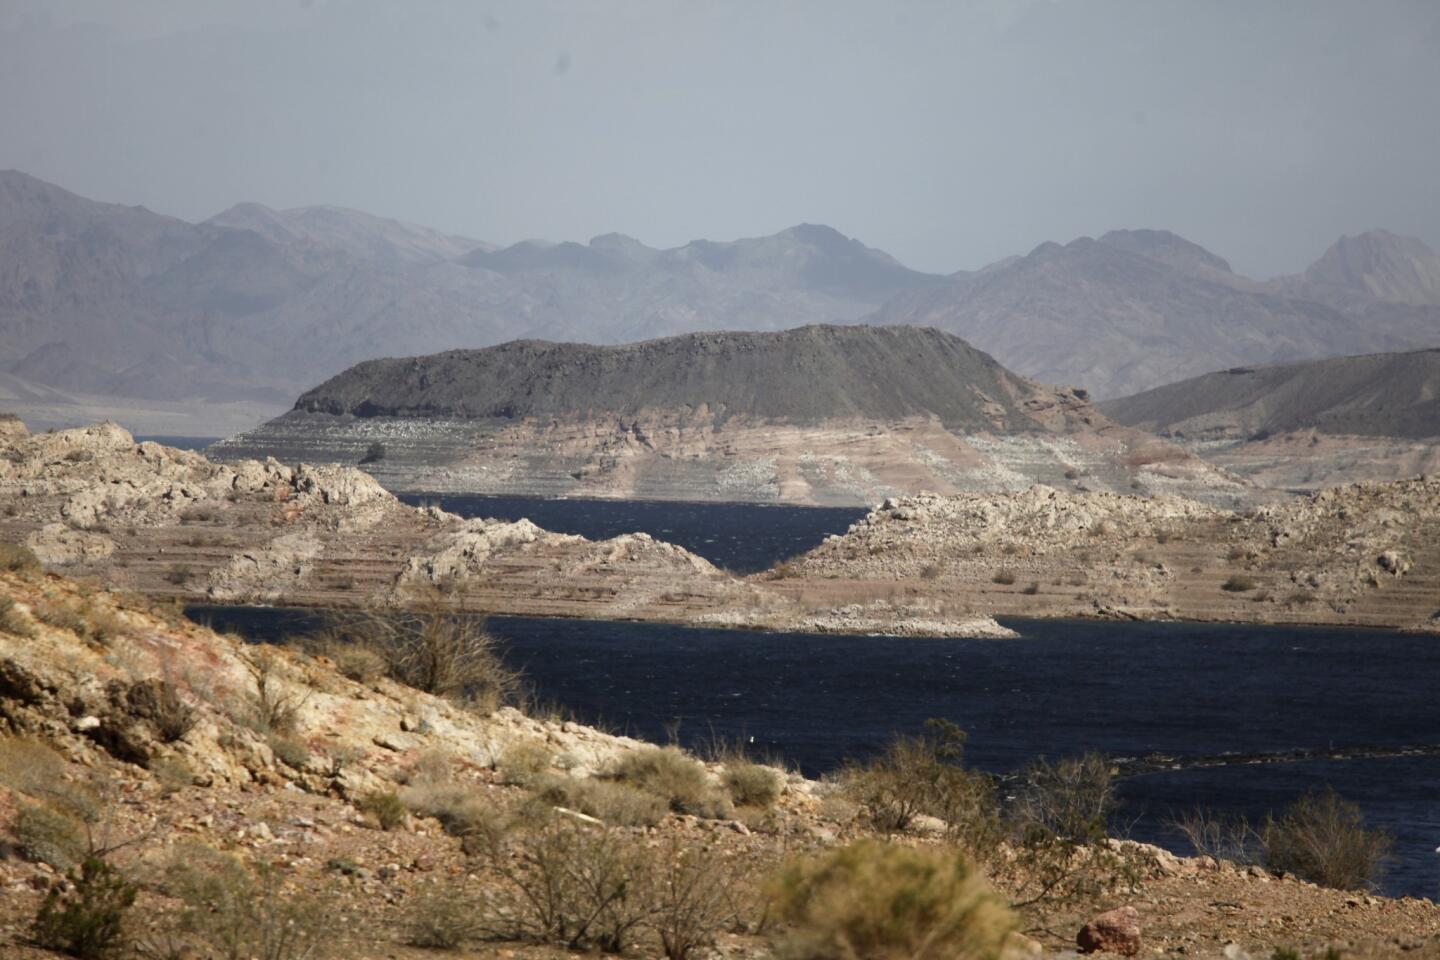 An ongoing drought and the Colorado River's stunted flow have shrunk Lake Mead to its lowest level in generations.